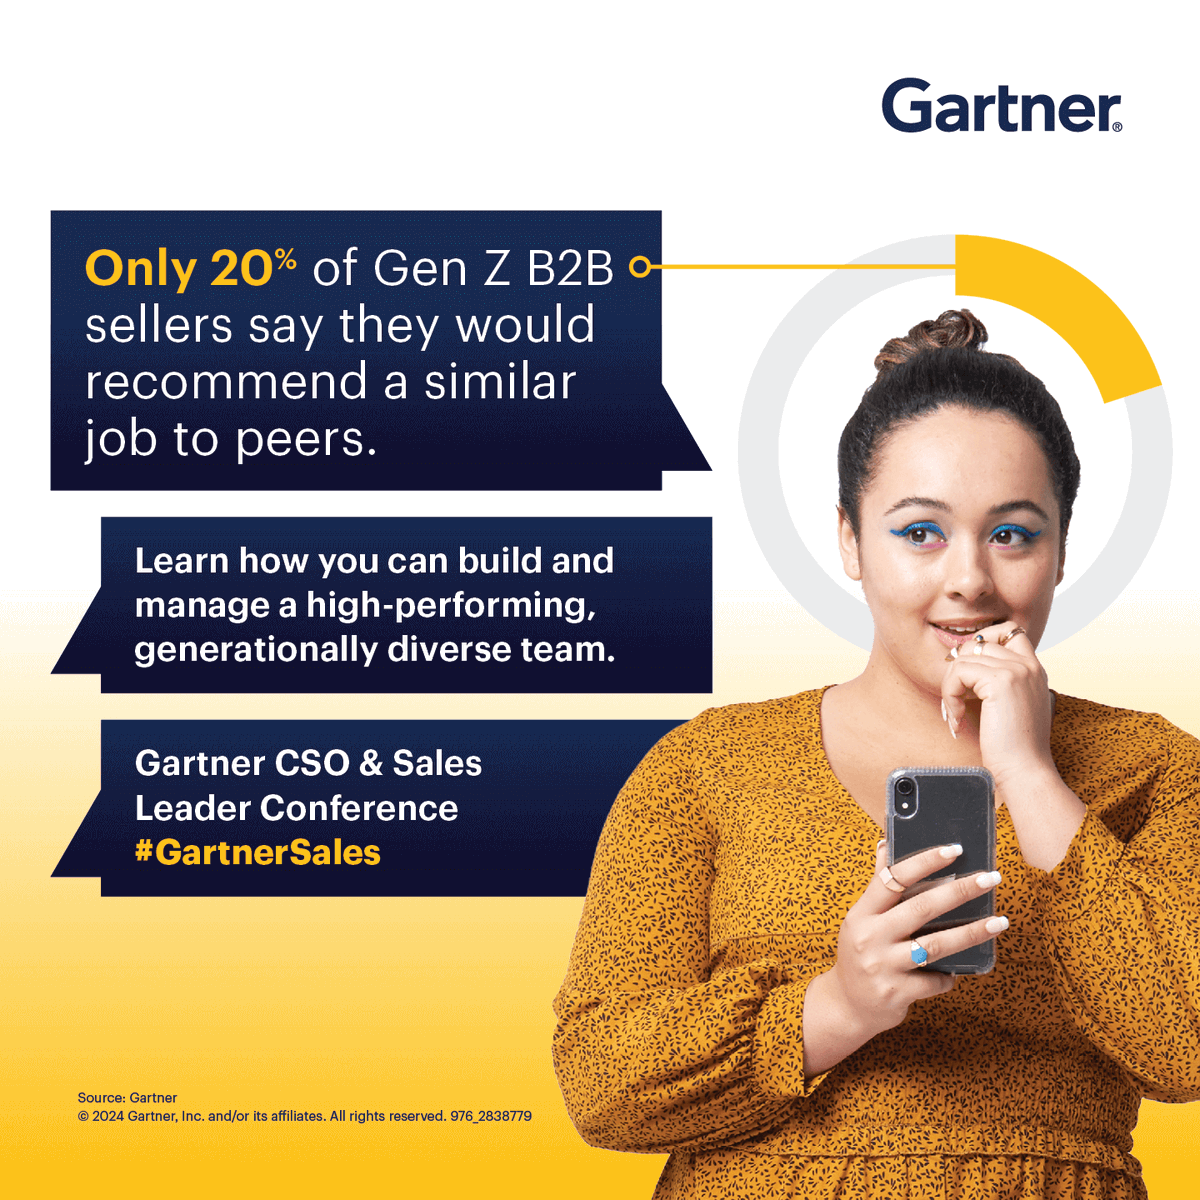 Learn how you can build and manage a high-performing, generationally diverse team at #GartnerSales. Check out this year’s agenda: gtnr.it/4aucS9K #B2BSales #GenZ #Talent #DEI